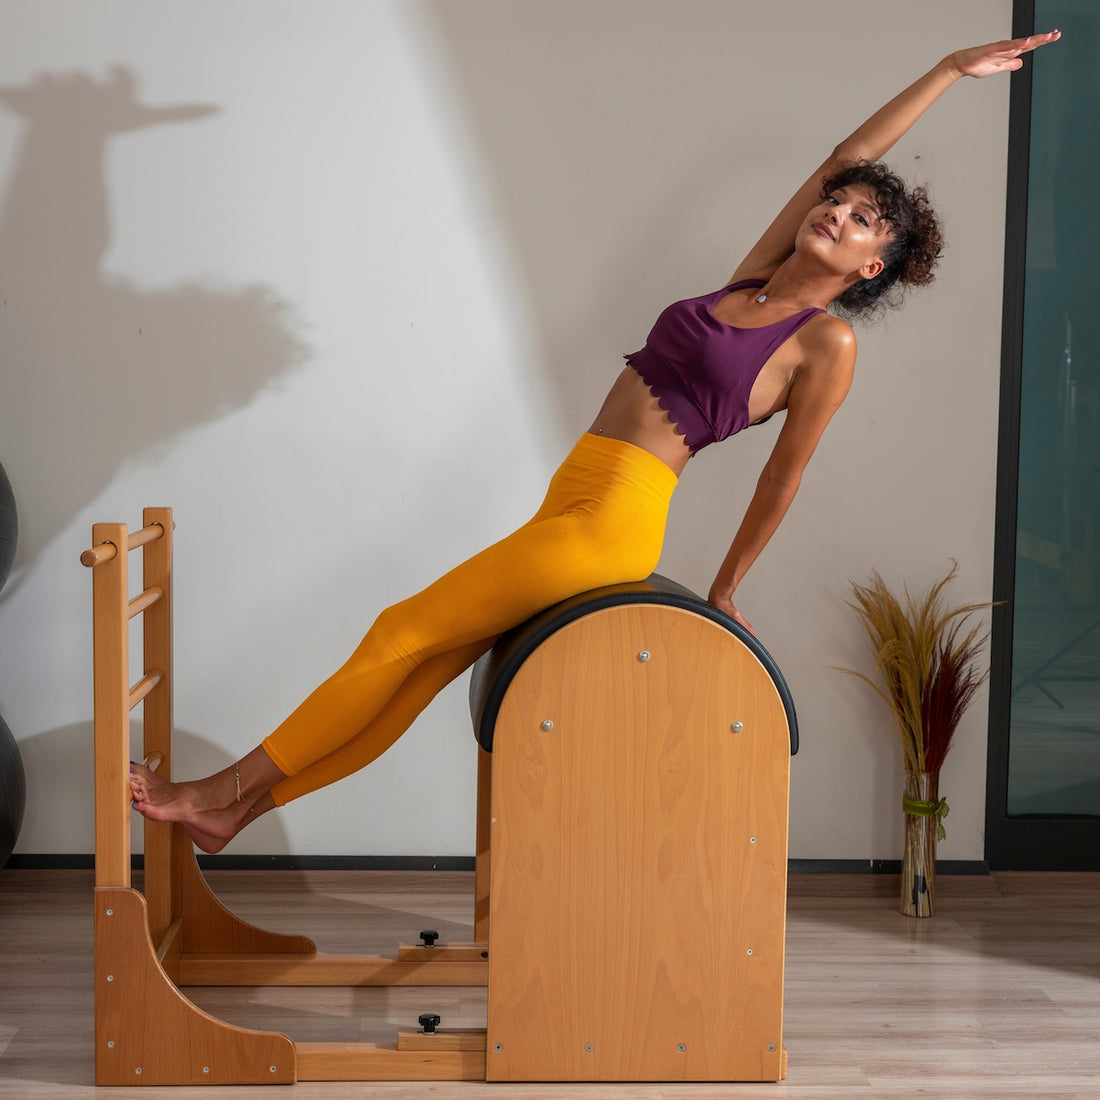 Can Pilates Help With Reducing Stress and Anxiety?